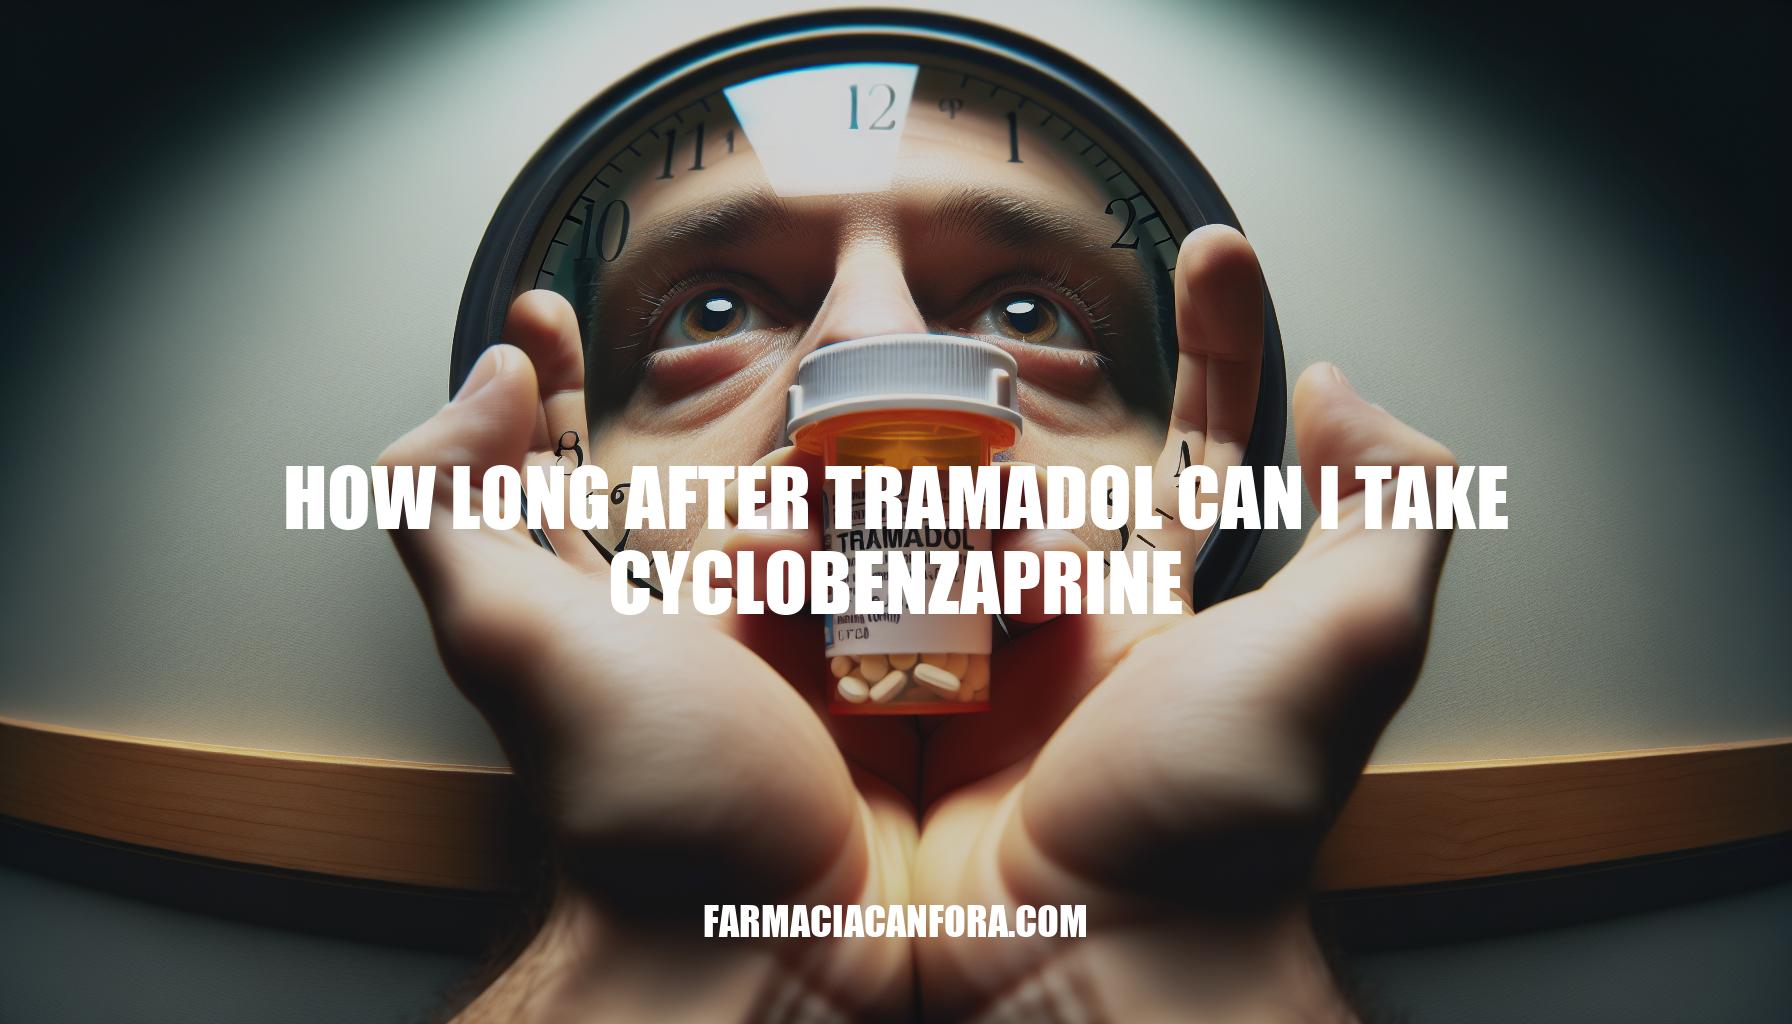 How Long After Tramadol Can I Take Cyclobenzaprine